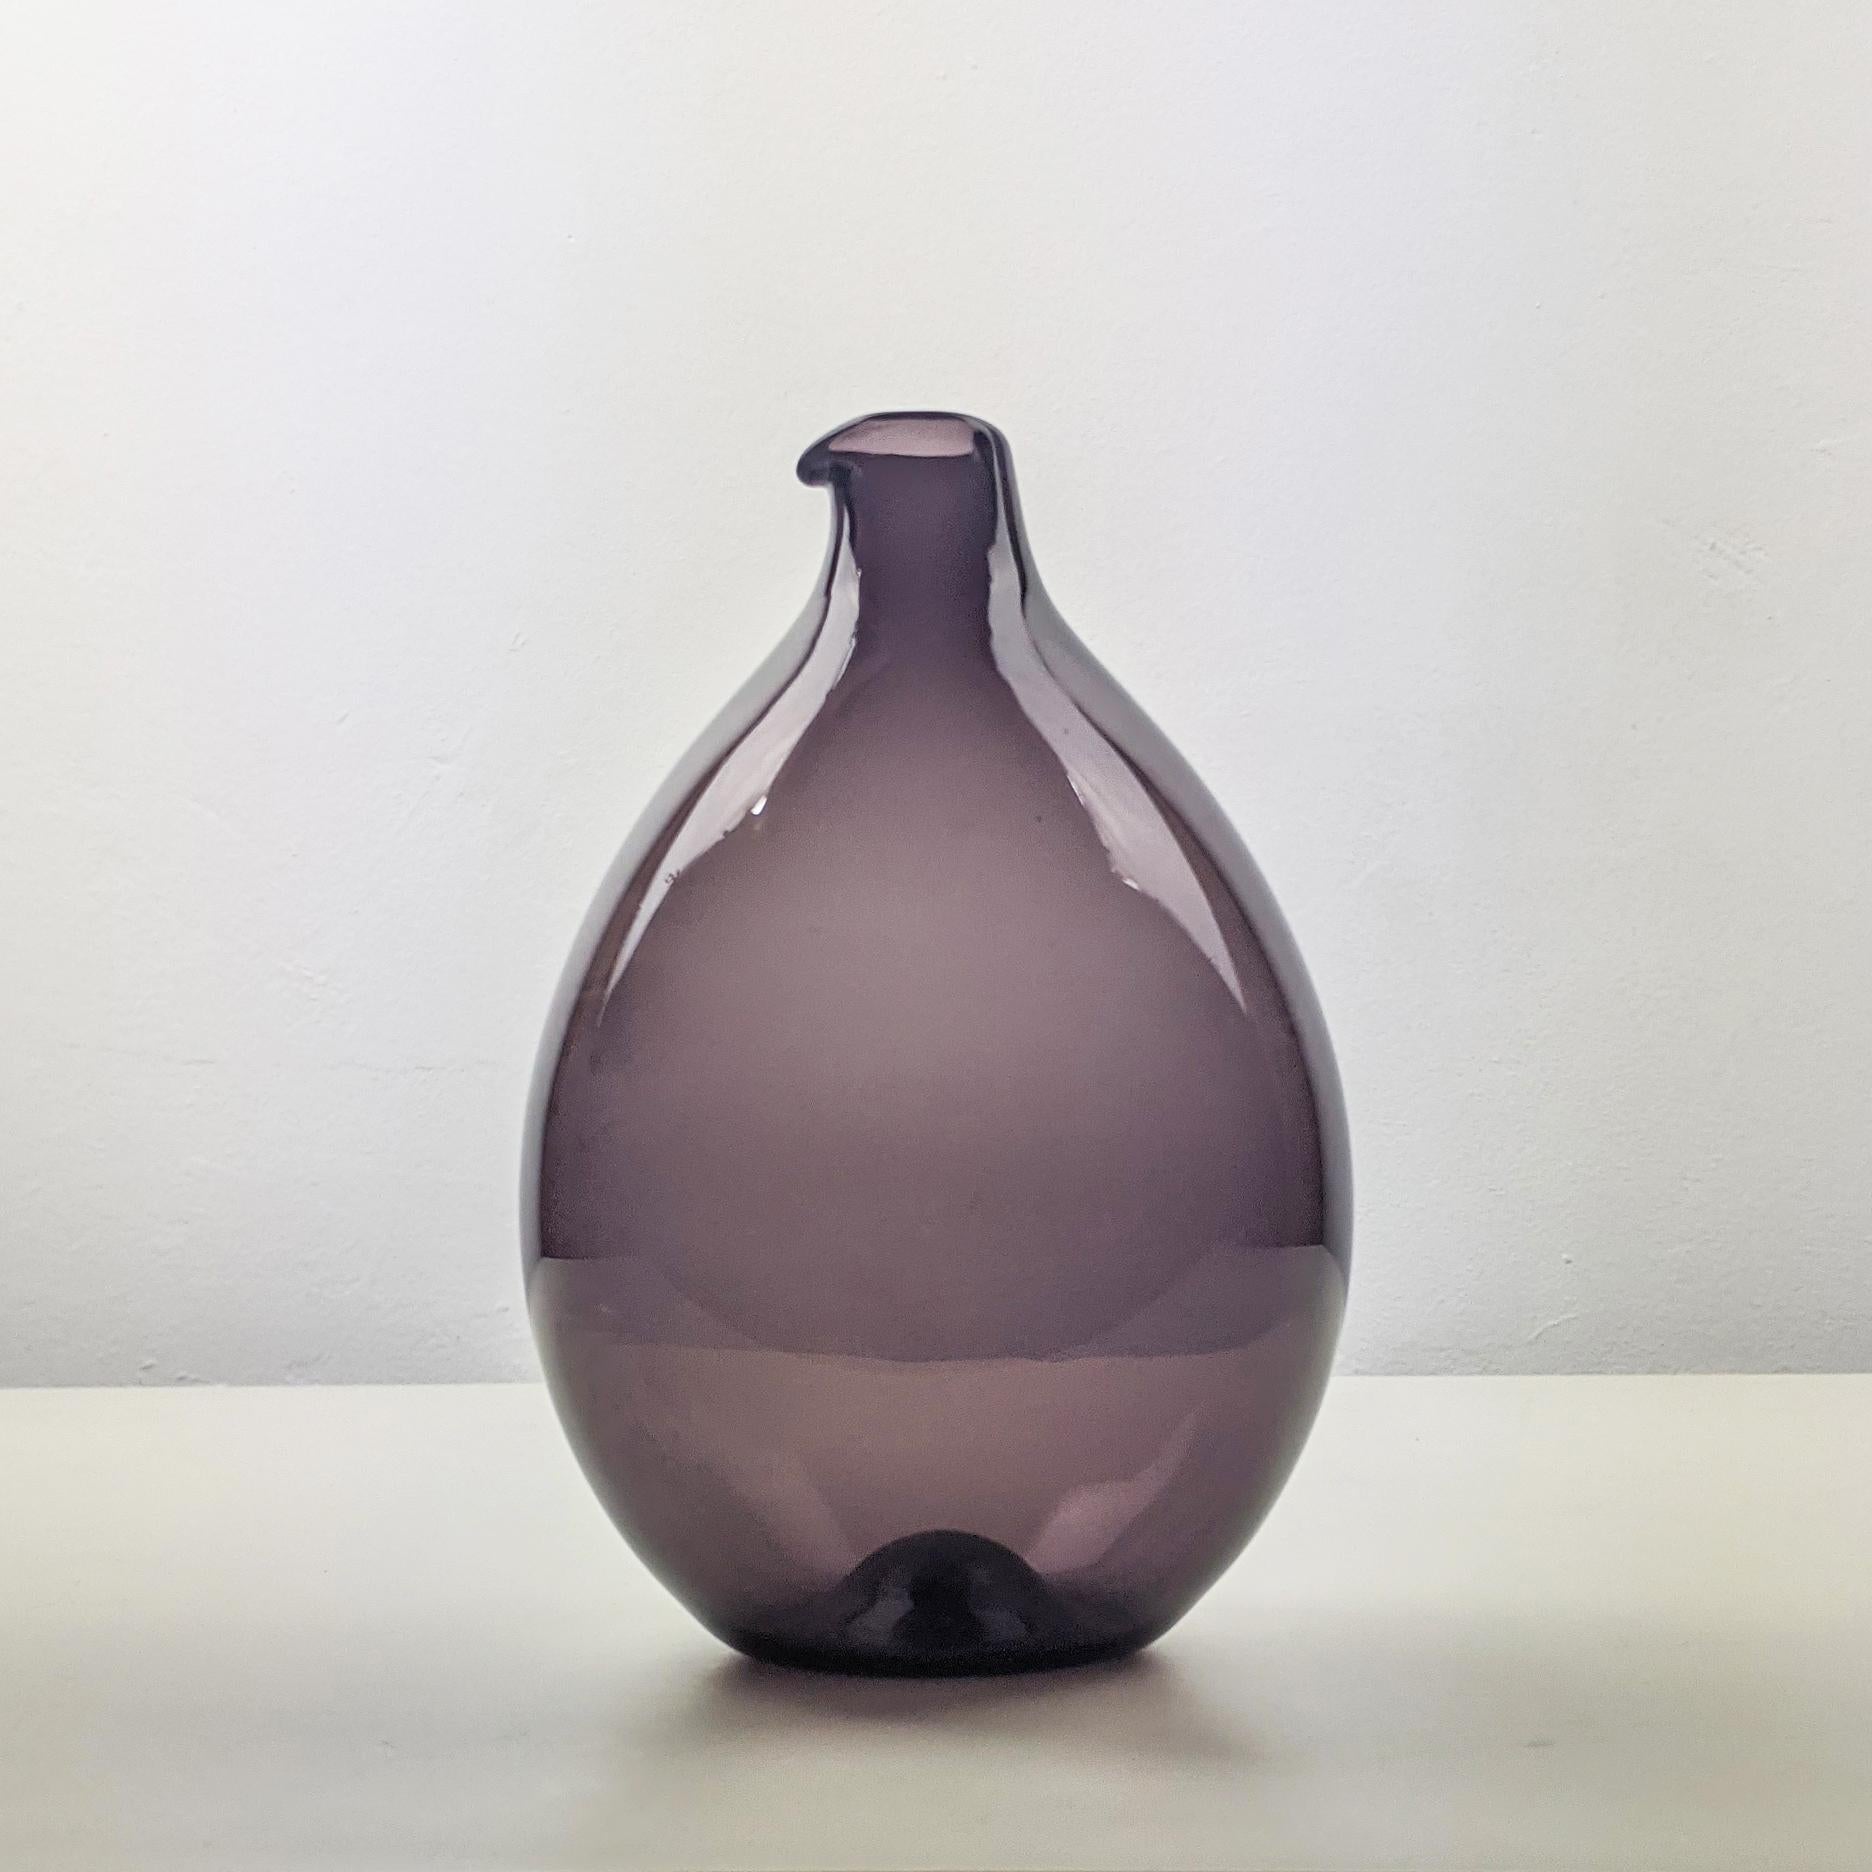 Timo Sarpaneva for Iittala, 1956.
Bird bottle (Lintupullo) ‘Round i-bottle’ from the i-line series.

Beautiful early example dating from 1957.
Purple-tinted clear blown glass.
Excellent condition.
Underside engraved 'Timo Sarpaneva, Iittala,